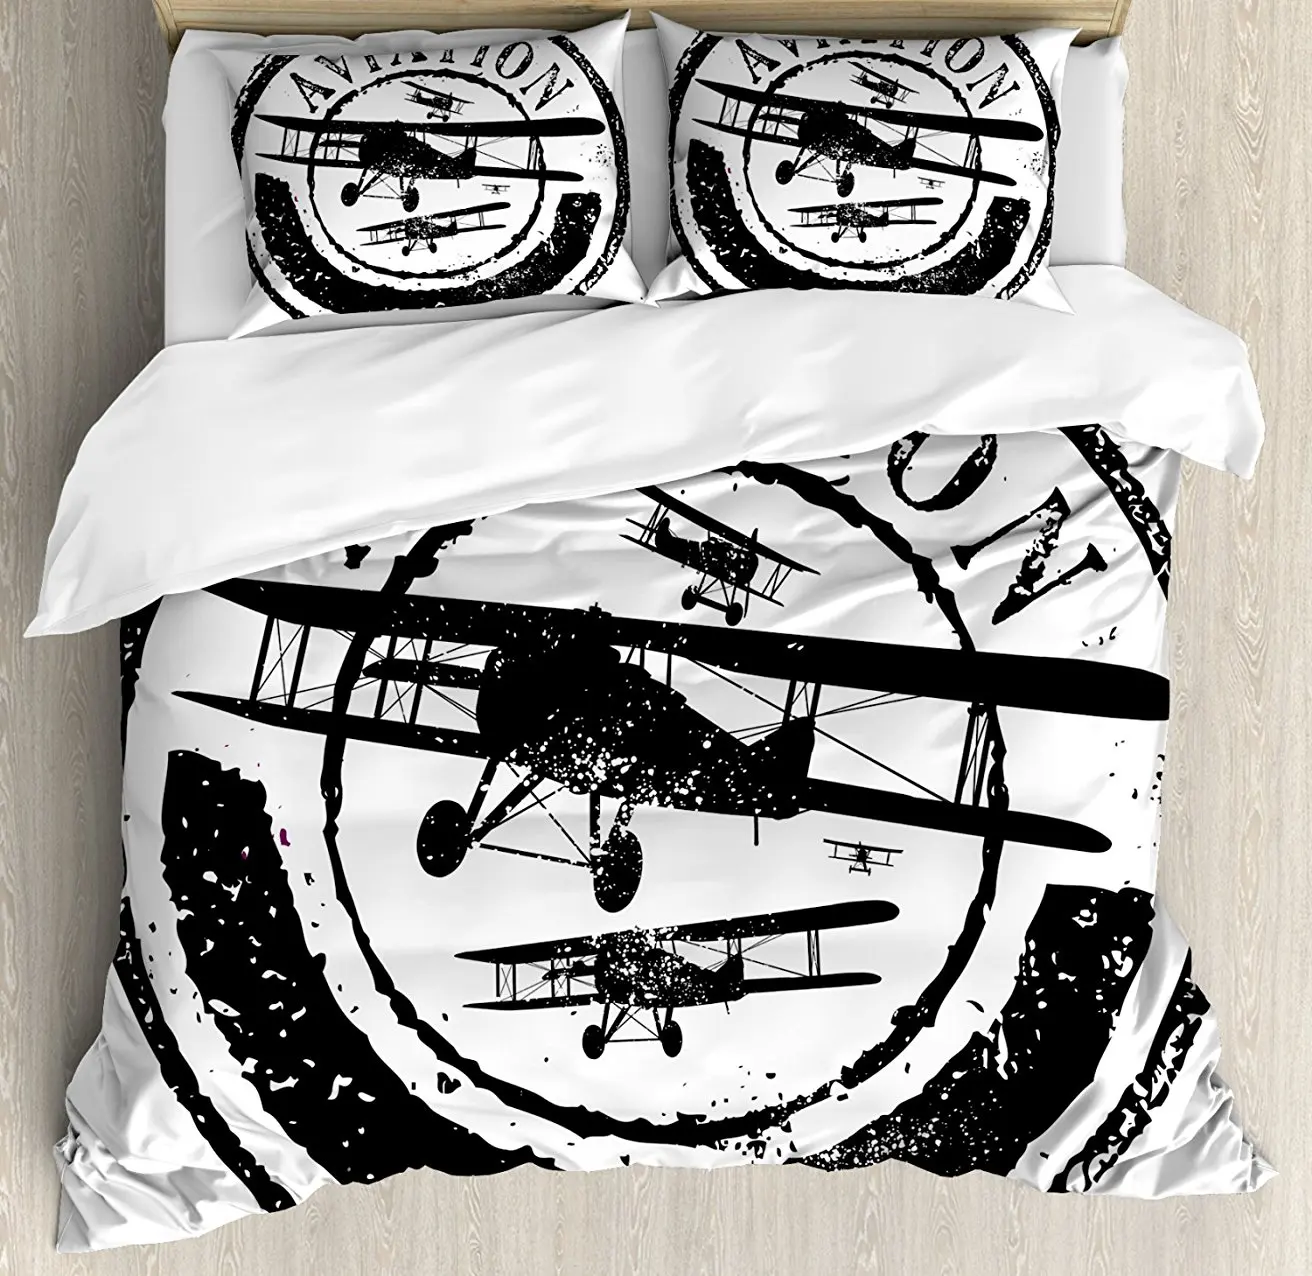 

Vintage Airplane Decor Duvet Cover Set Grunge Stamp Design with Word Aviation and Airplane Silhouettes Decor Bedding Set